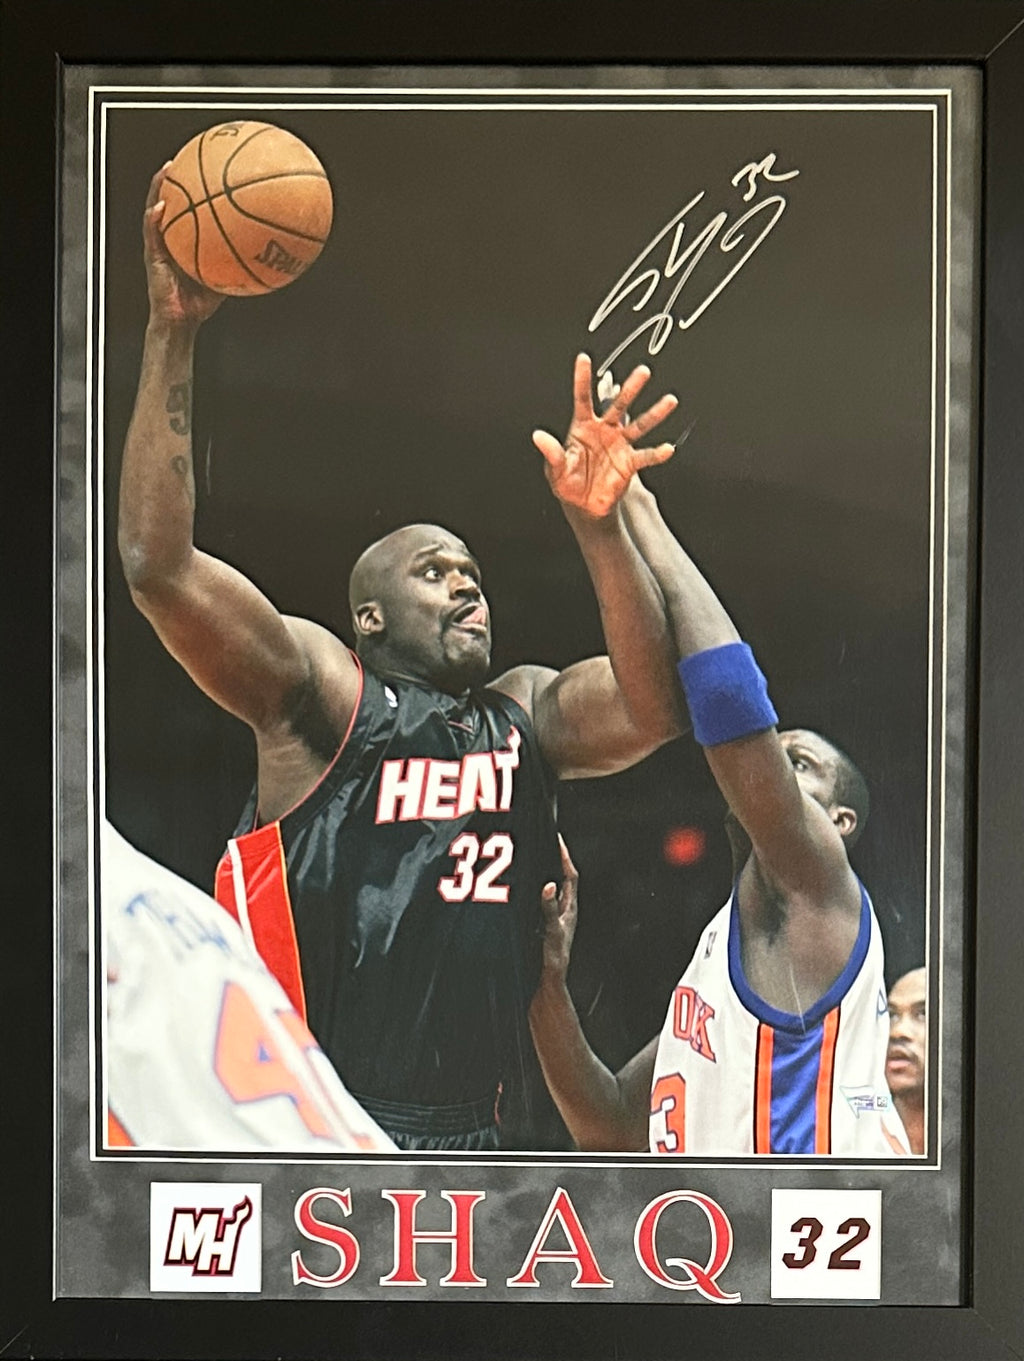 Shaquille O'Neal autographed signed framed 16x20 photo NBA Miami Heat authentic